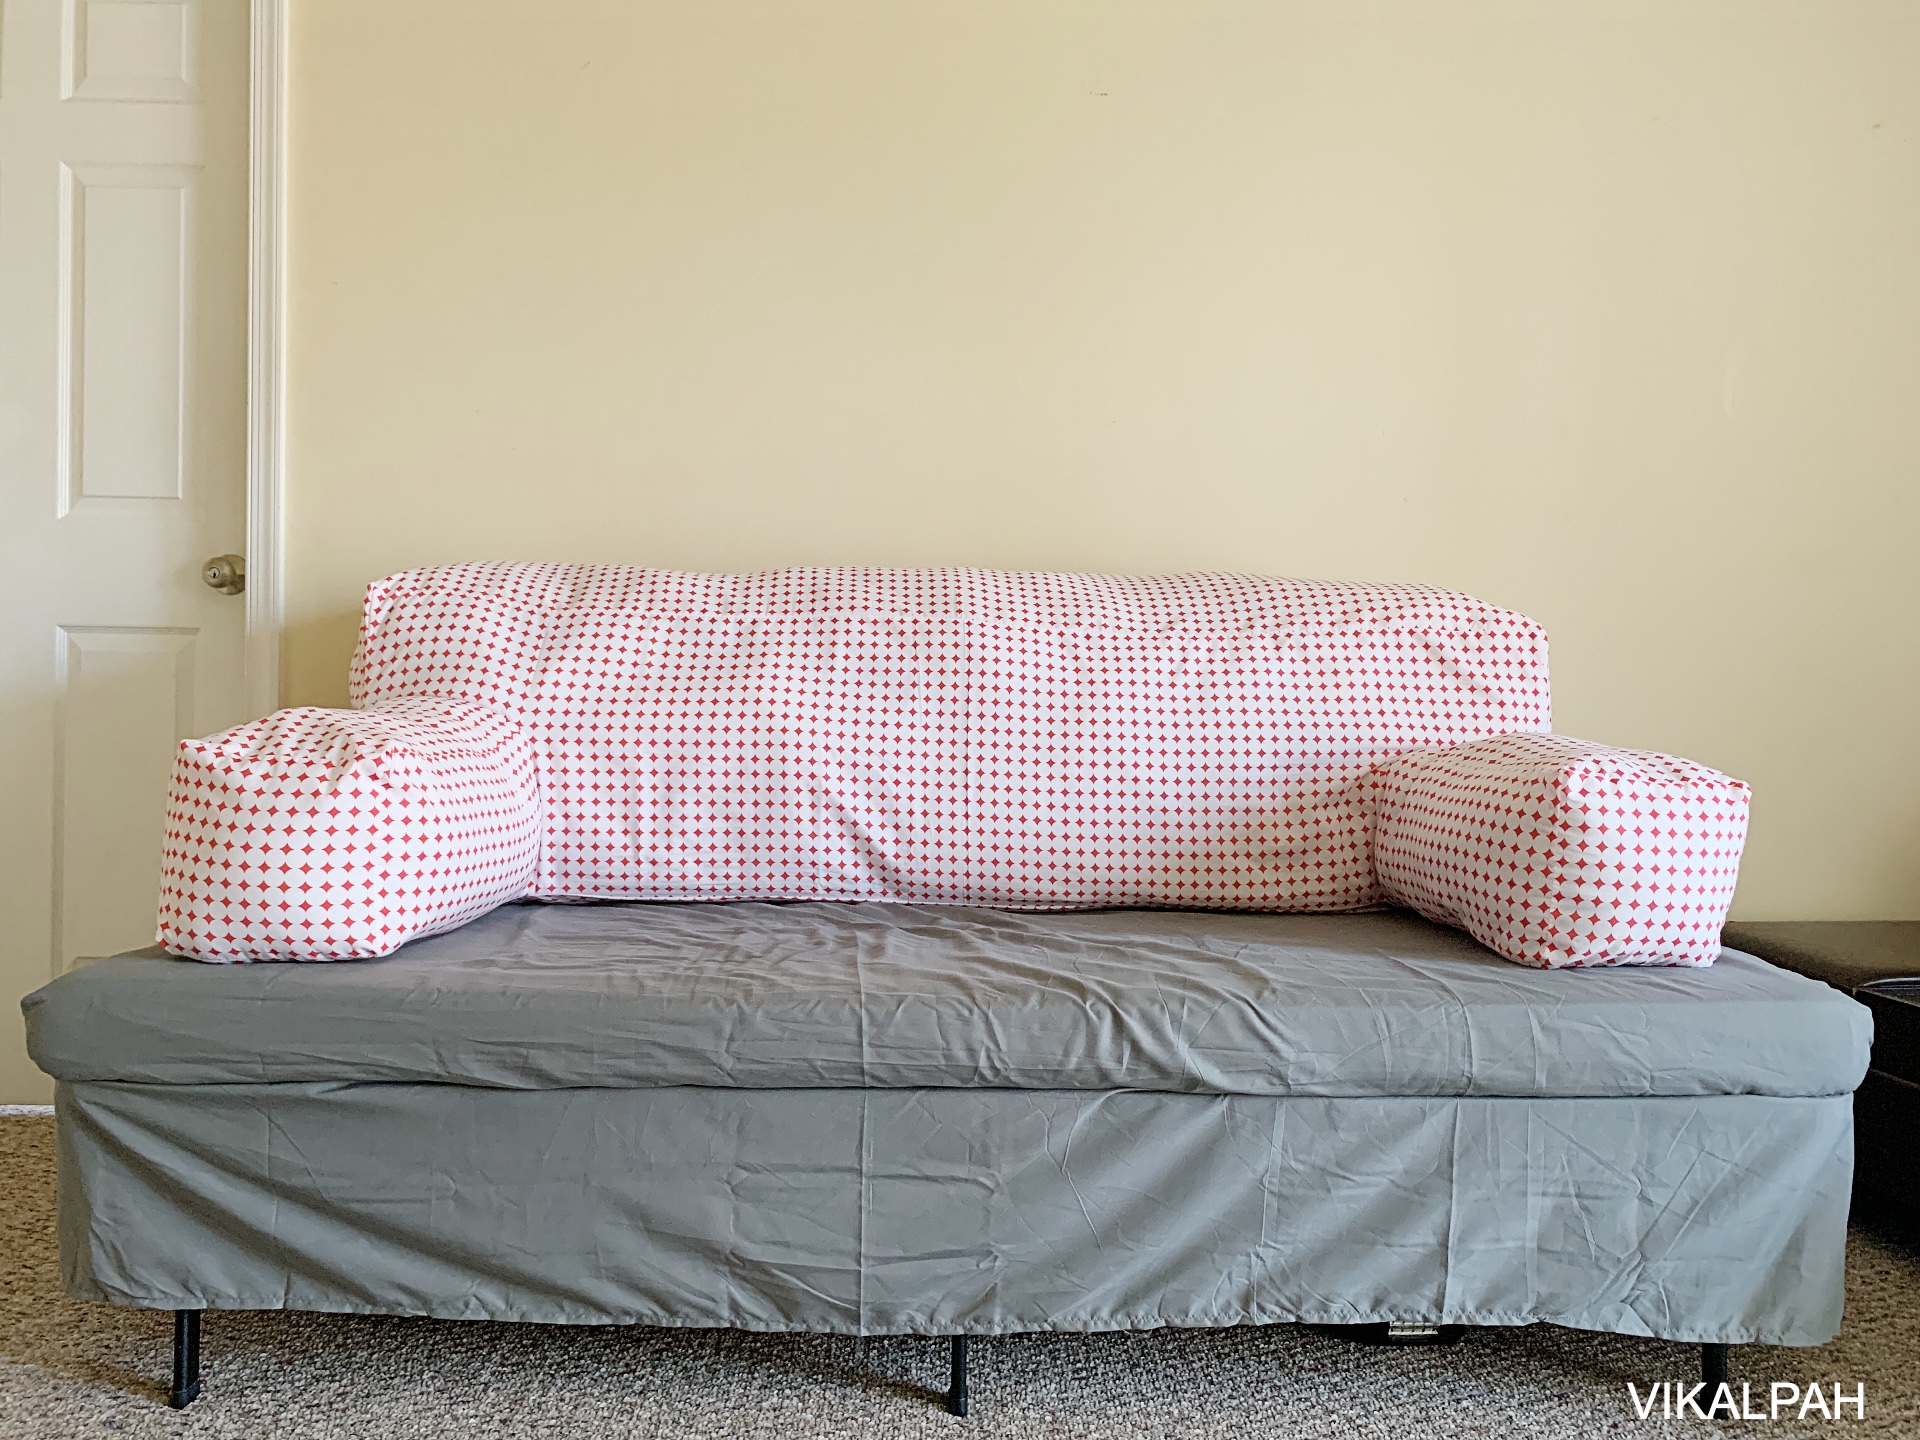 How To Convert A Twin Bed Into Couch, Diy Couch Out Of Twin Beds